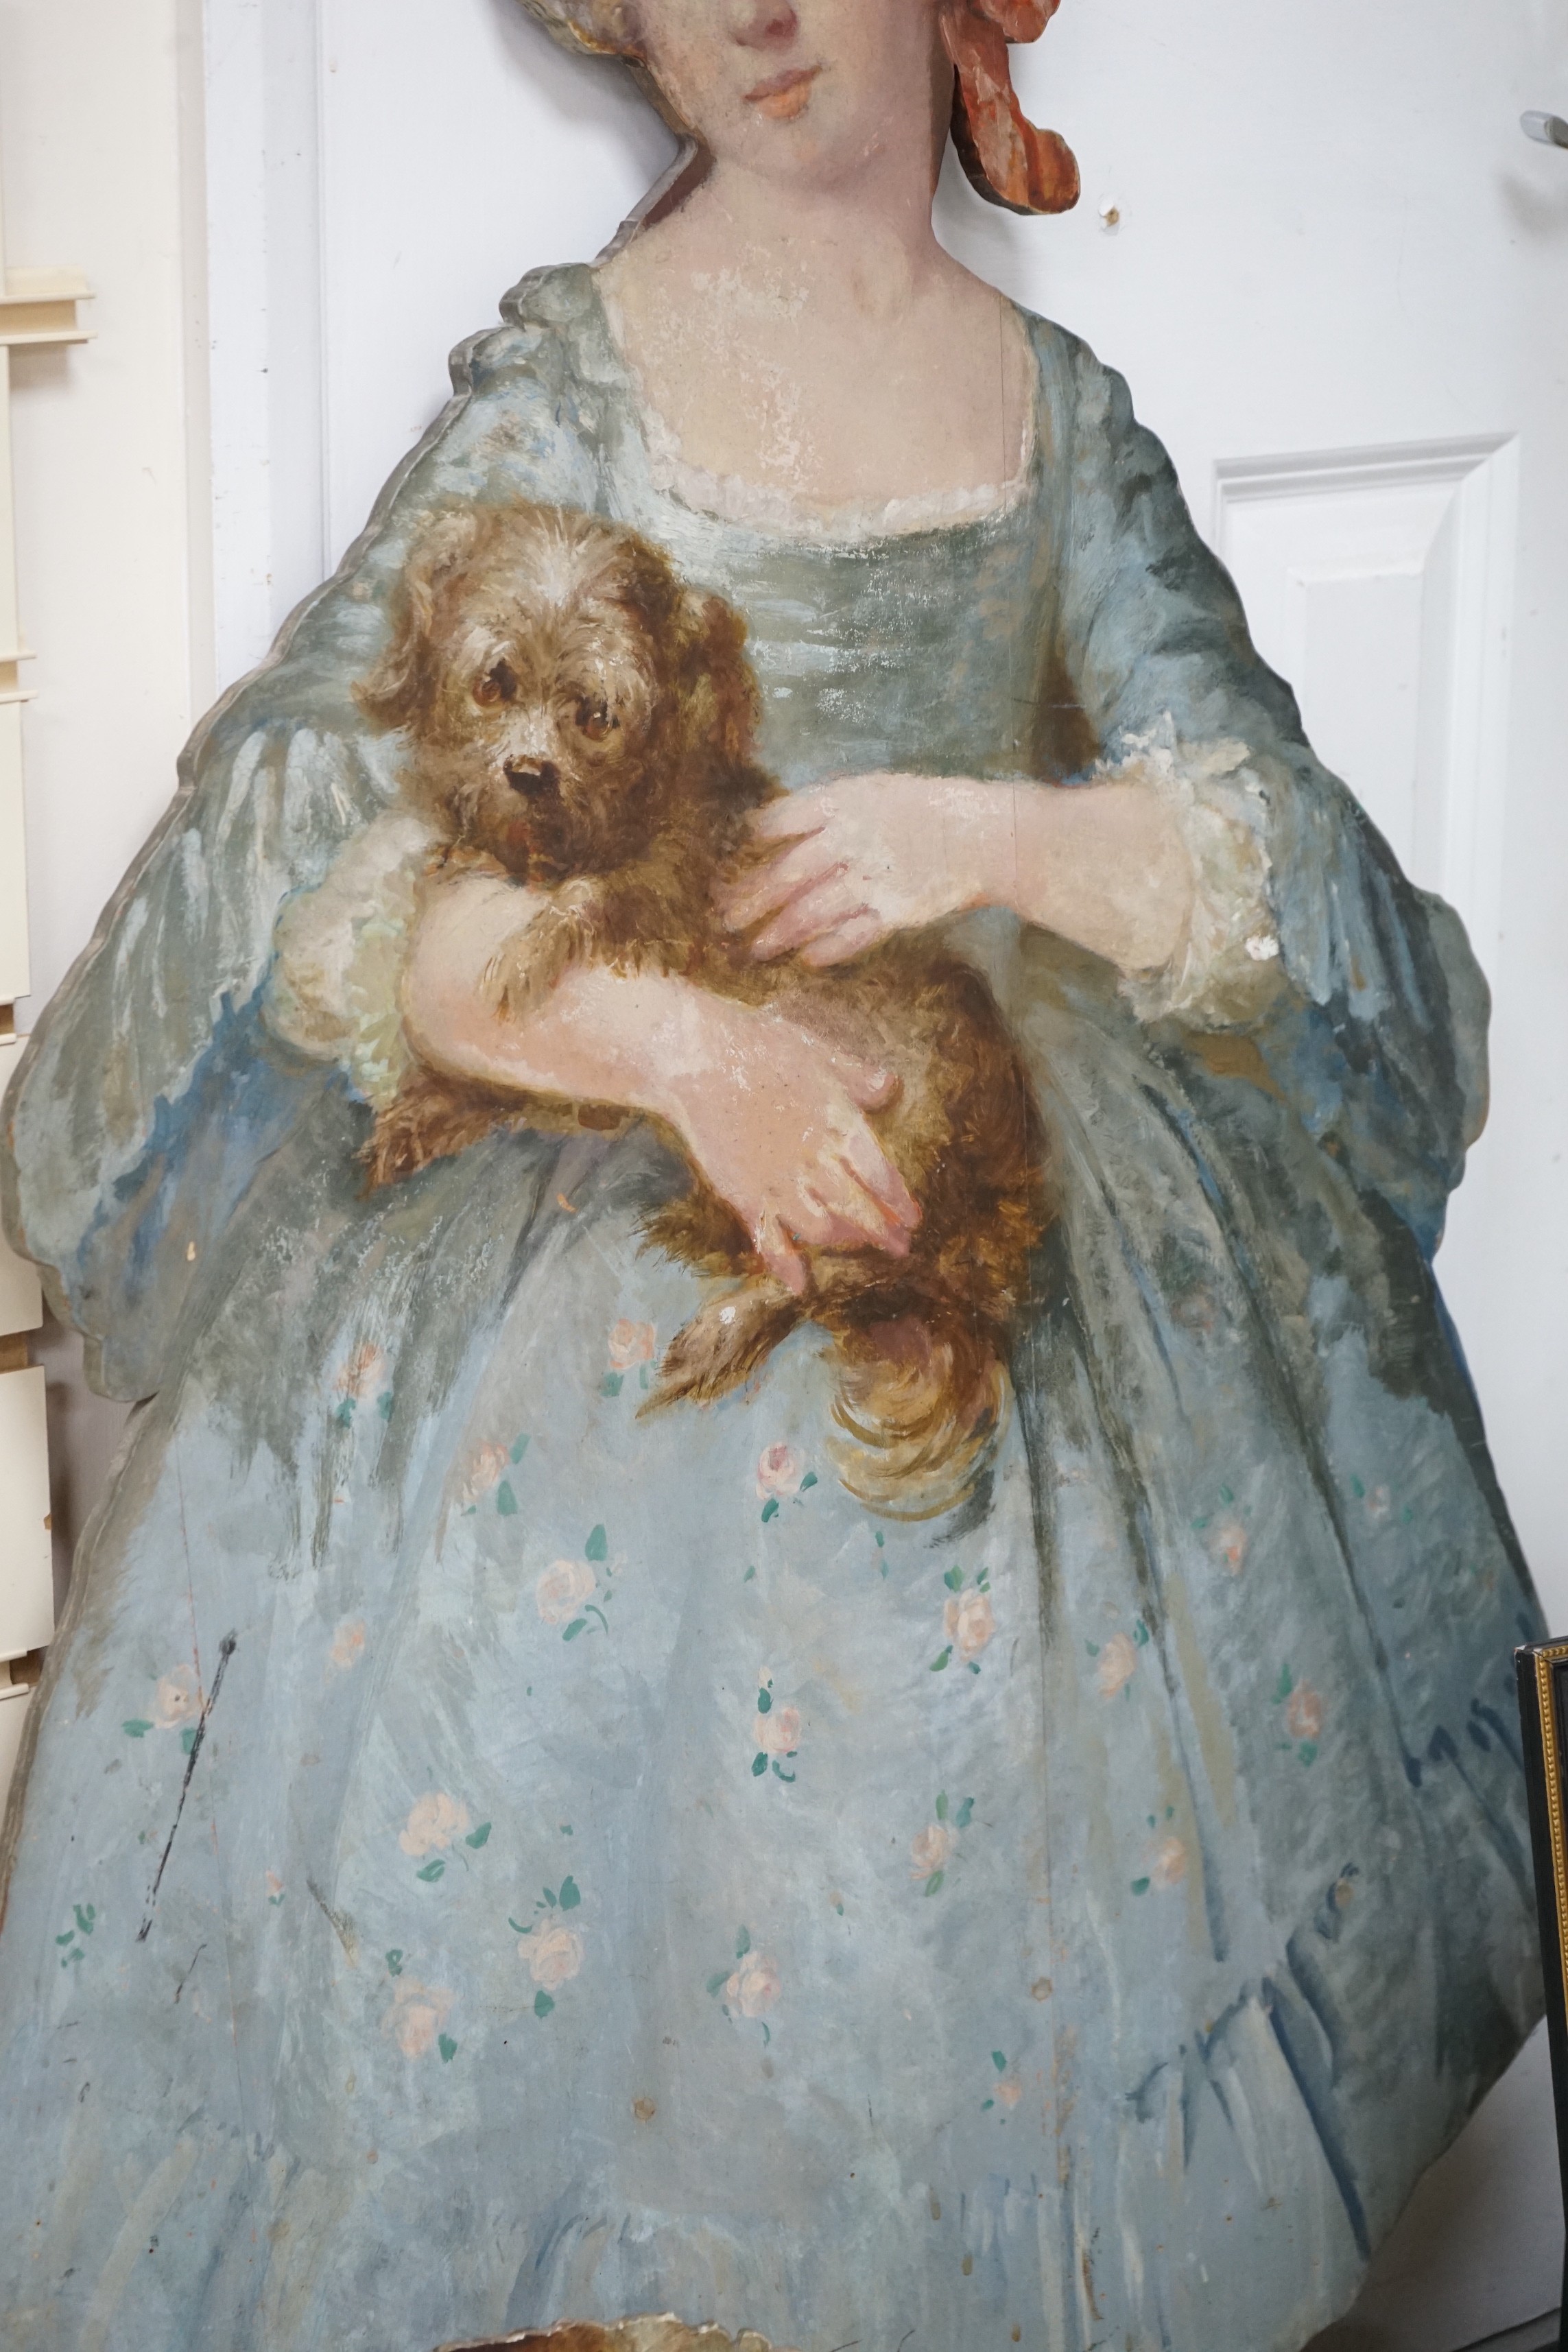 Two painted wood dummy boards, early 20th century, standing figure of a young girl holding a dog, in imitation of Pompeo Batoni (1708-1787), portrait of Countess Stanhope, 112cm tall, together with a smaller wood standin